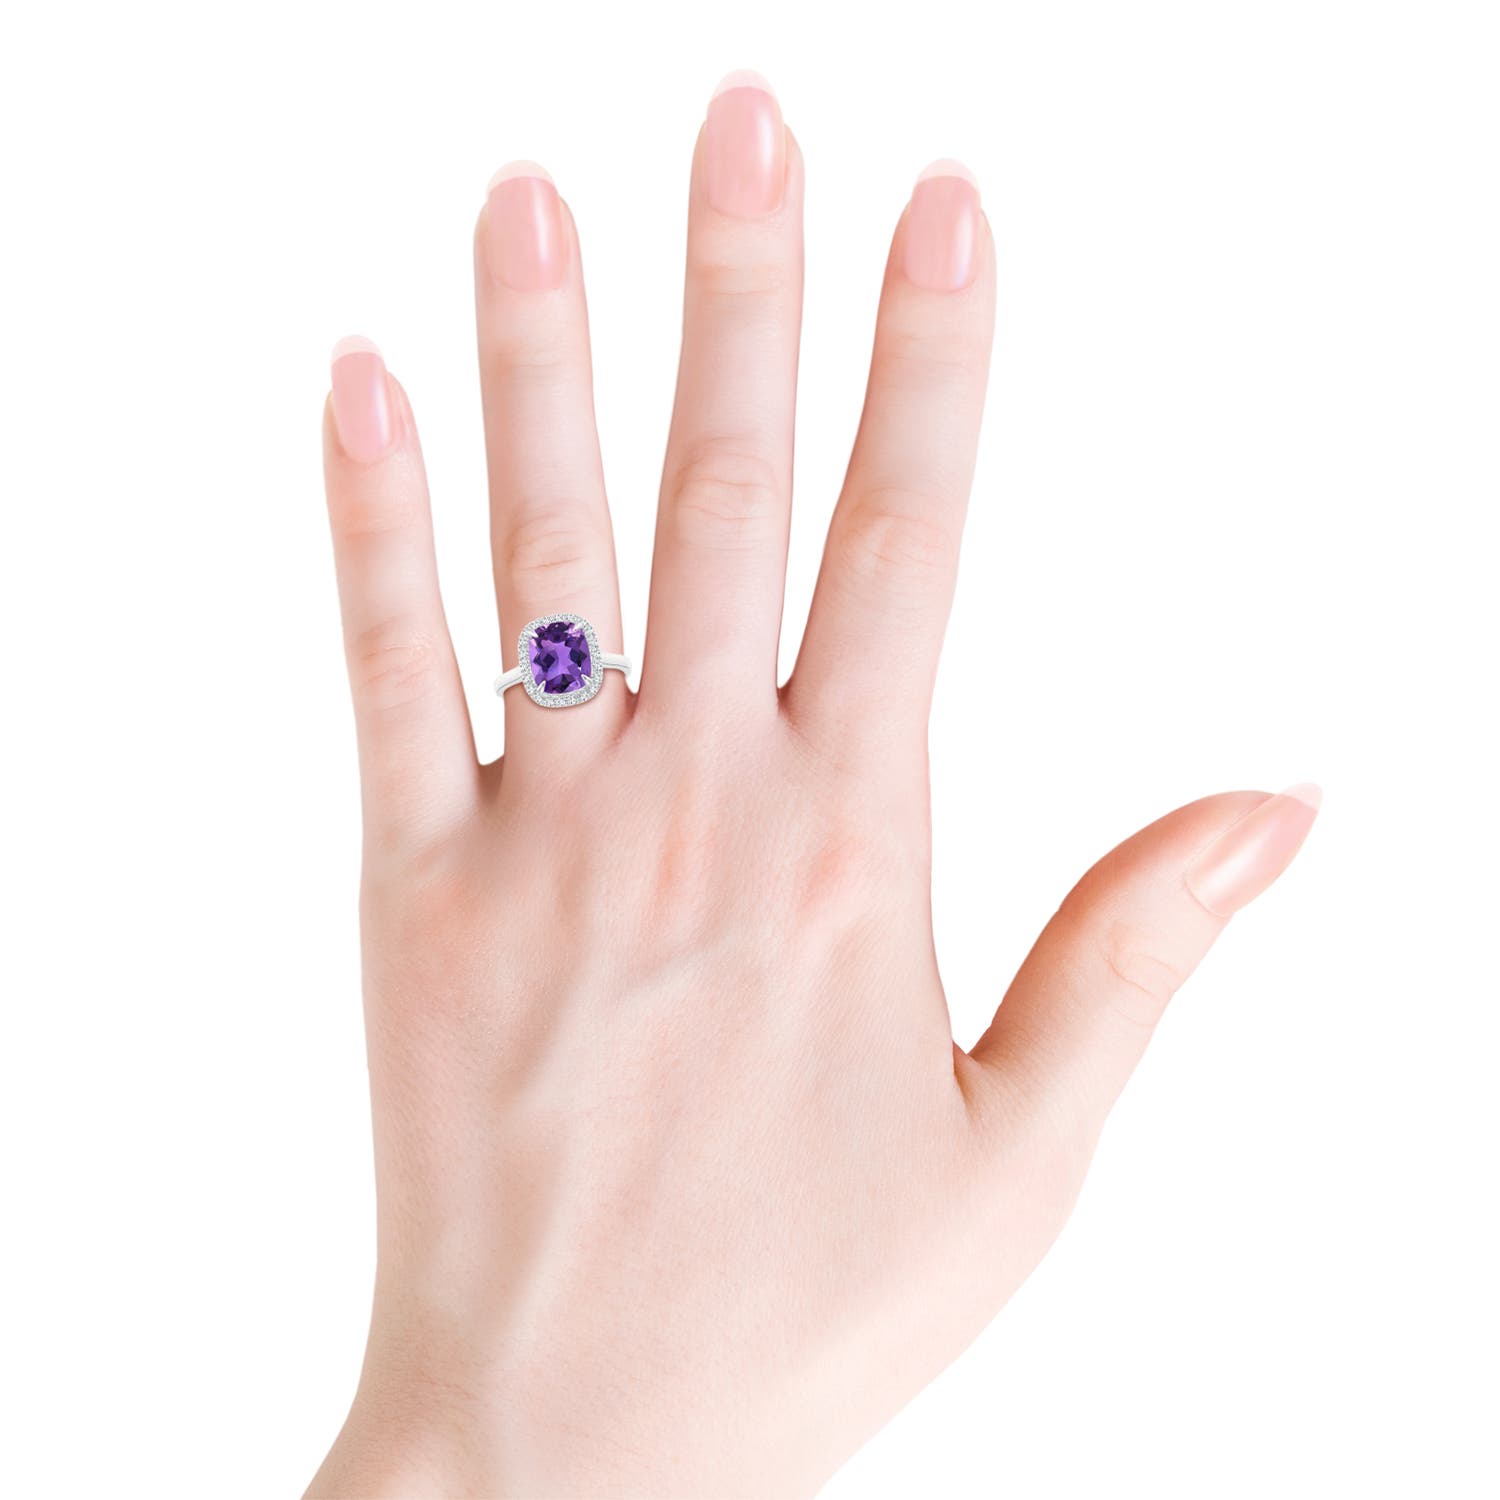 AAA - Amethyst / 3.01 CT / 14 KT White Gold